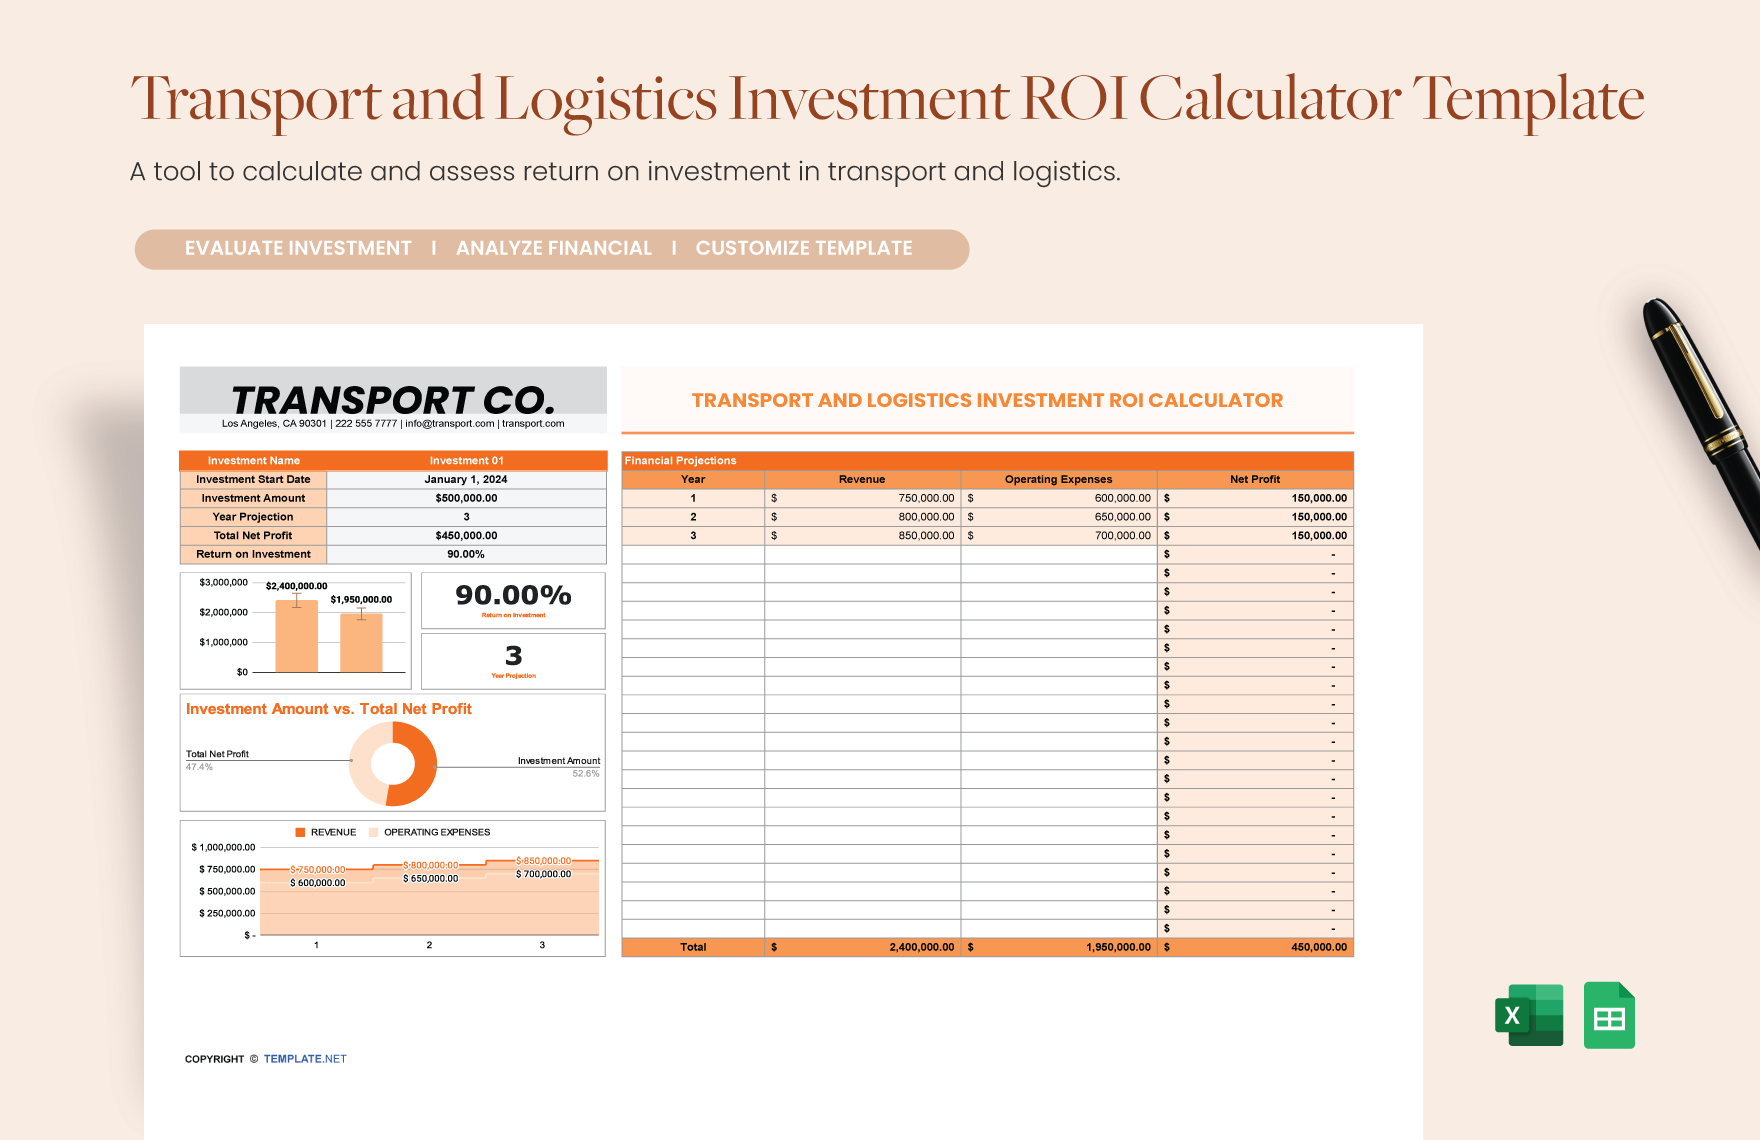 Free Transport and Logistics Investment ROI Calculator Template in Excel, Google Sheets